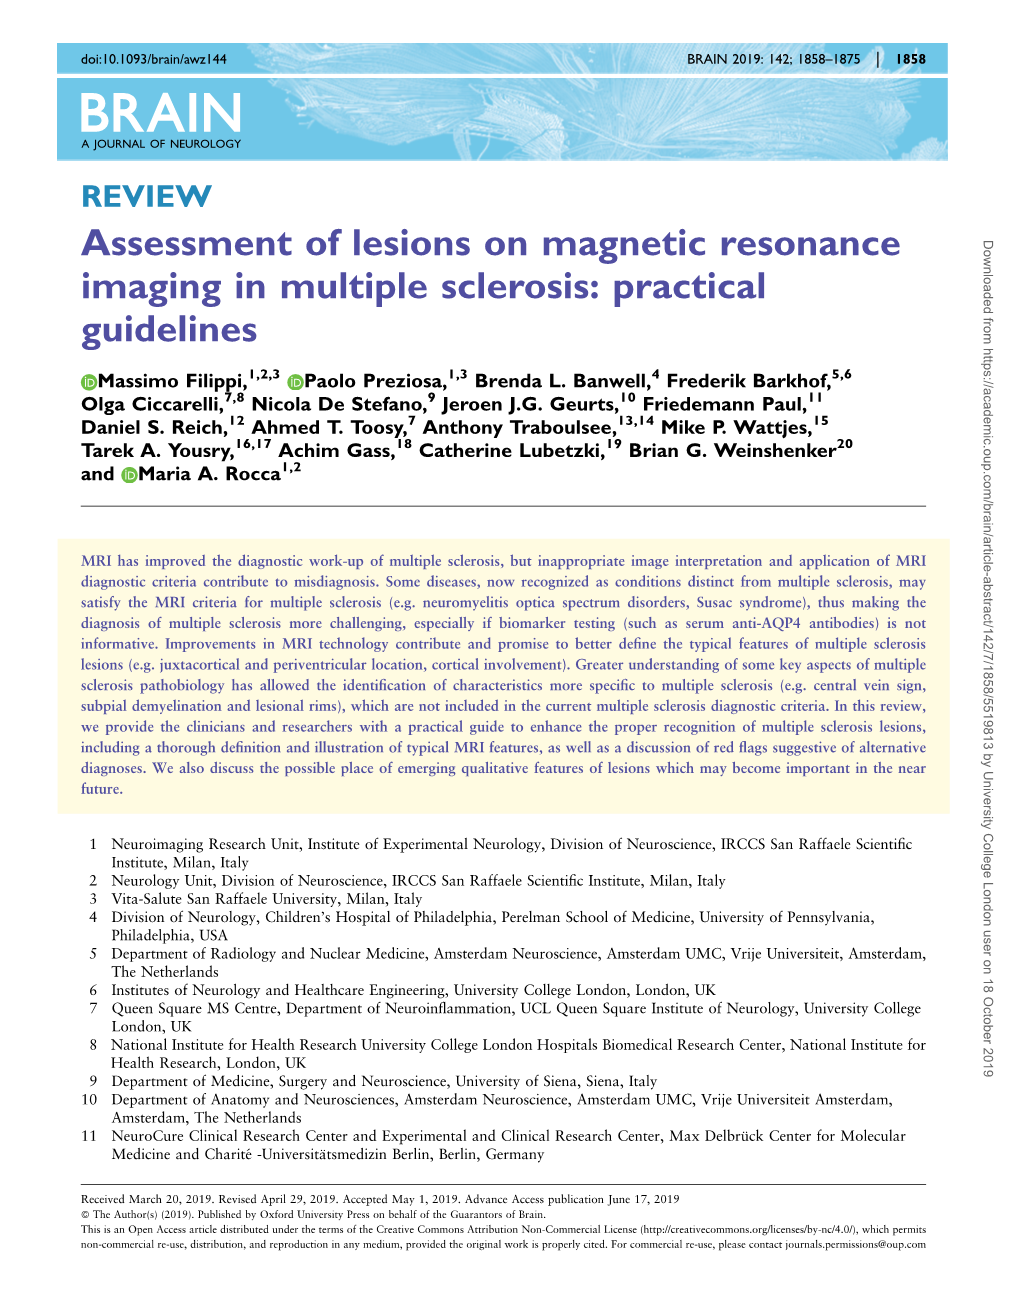 Assessment of Lesions on Magnetic Resonance Imaging in Multiple